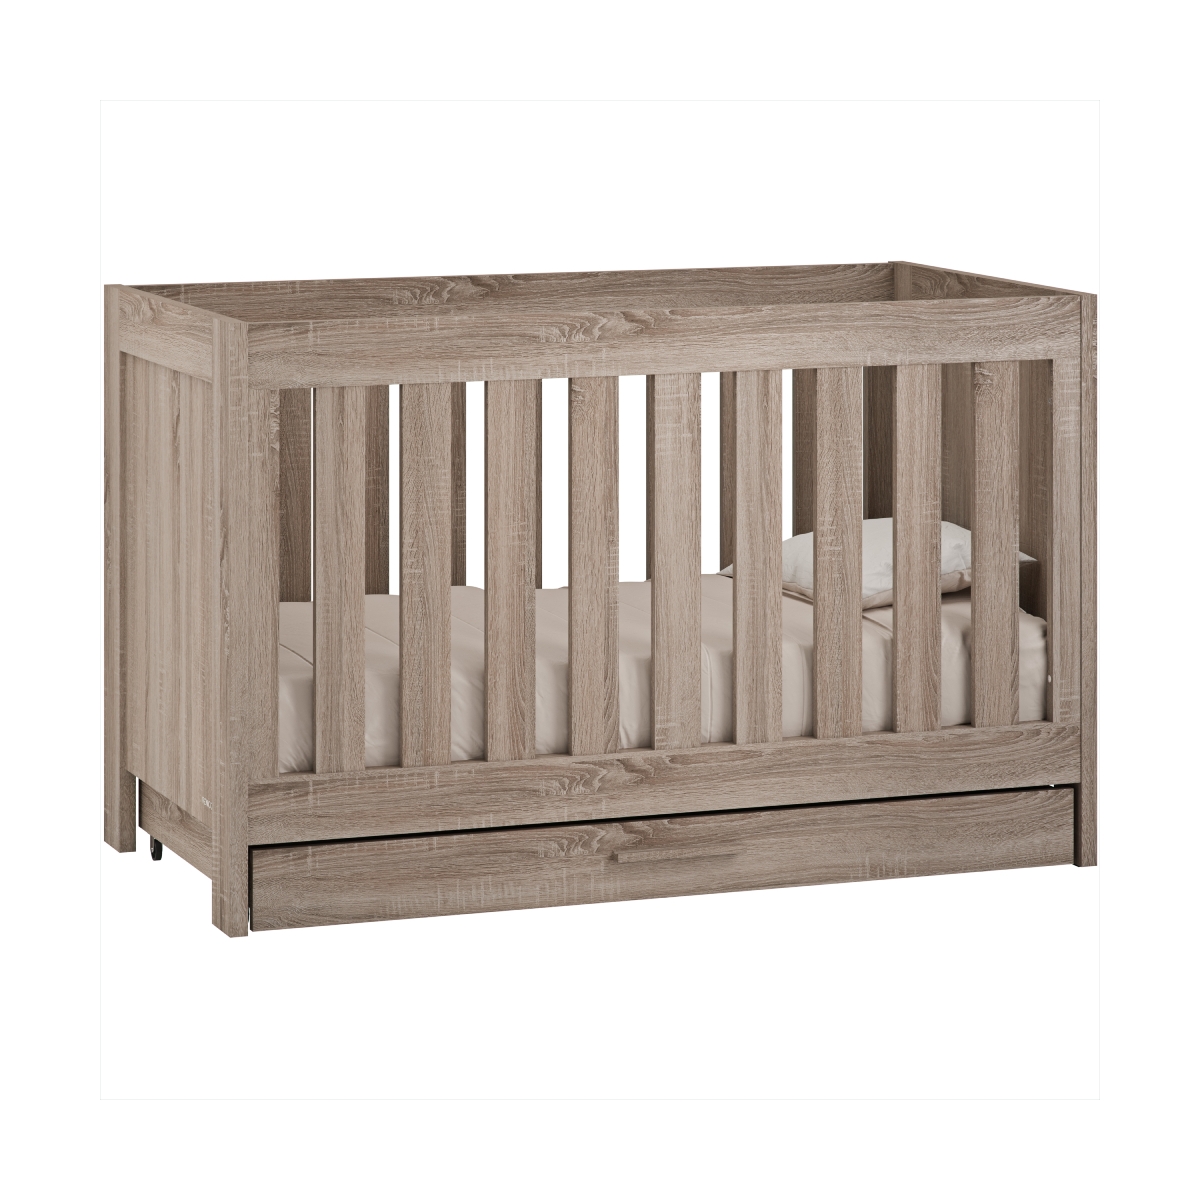 Venicci Forenzo Cot Bed with Undrawer